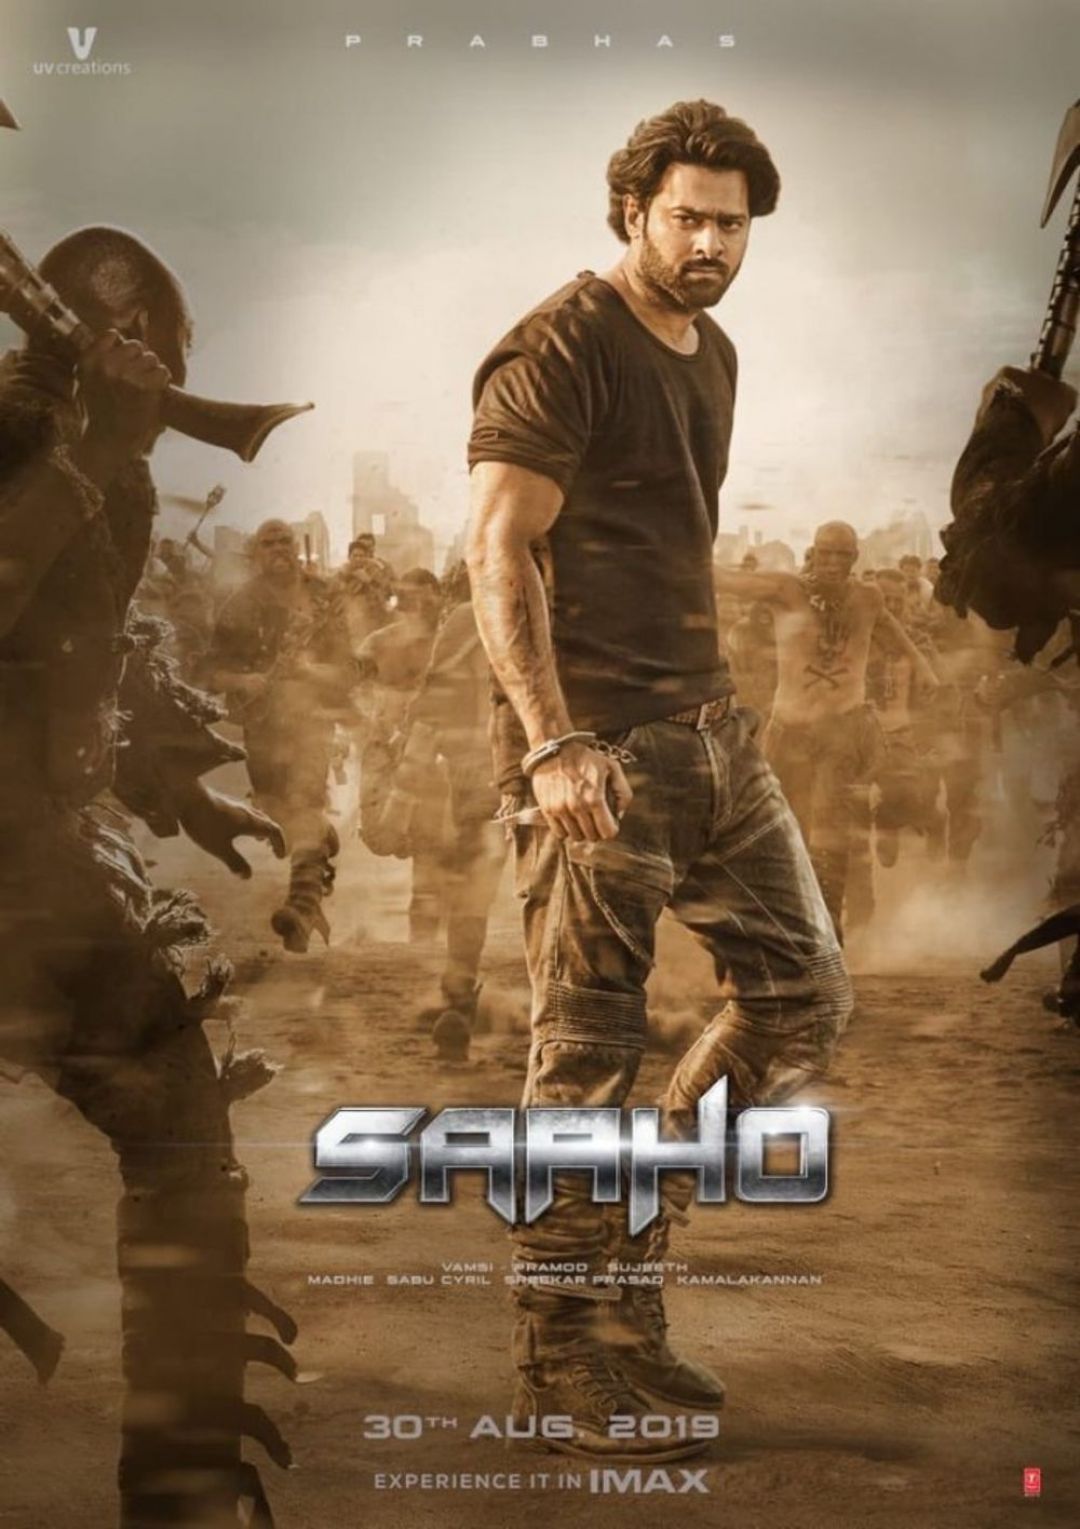 Saaho Movie Latest HD Photo and Wallpaper (1080p)